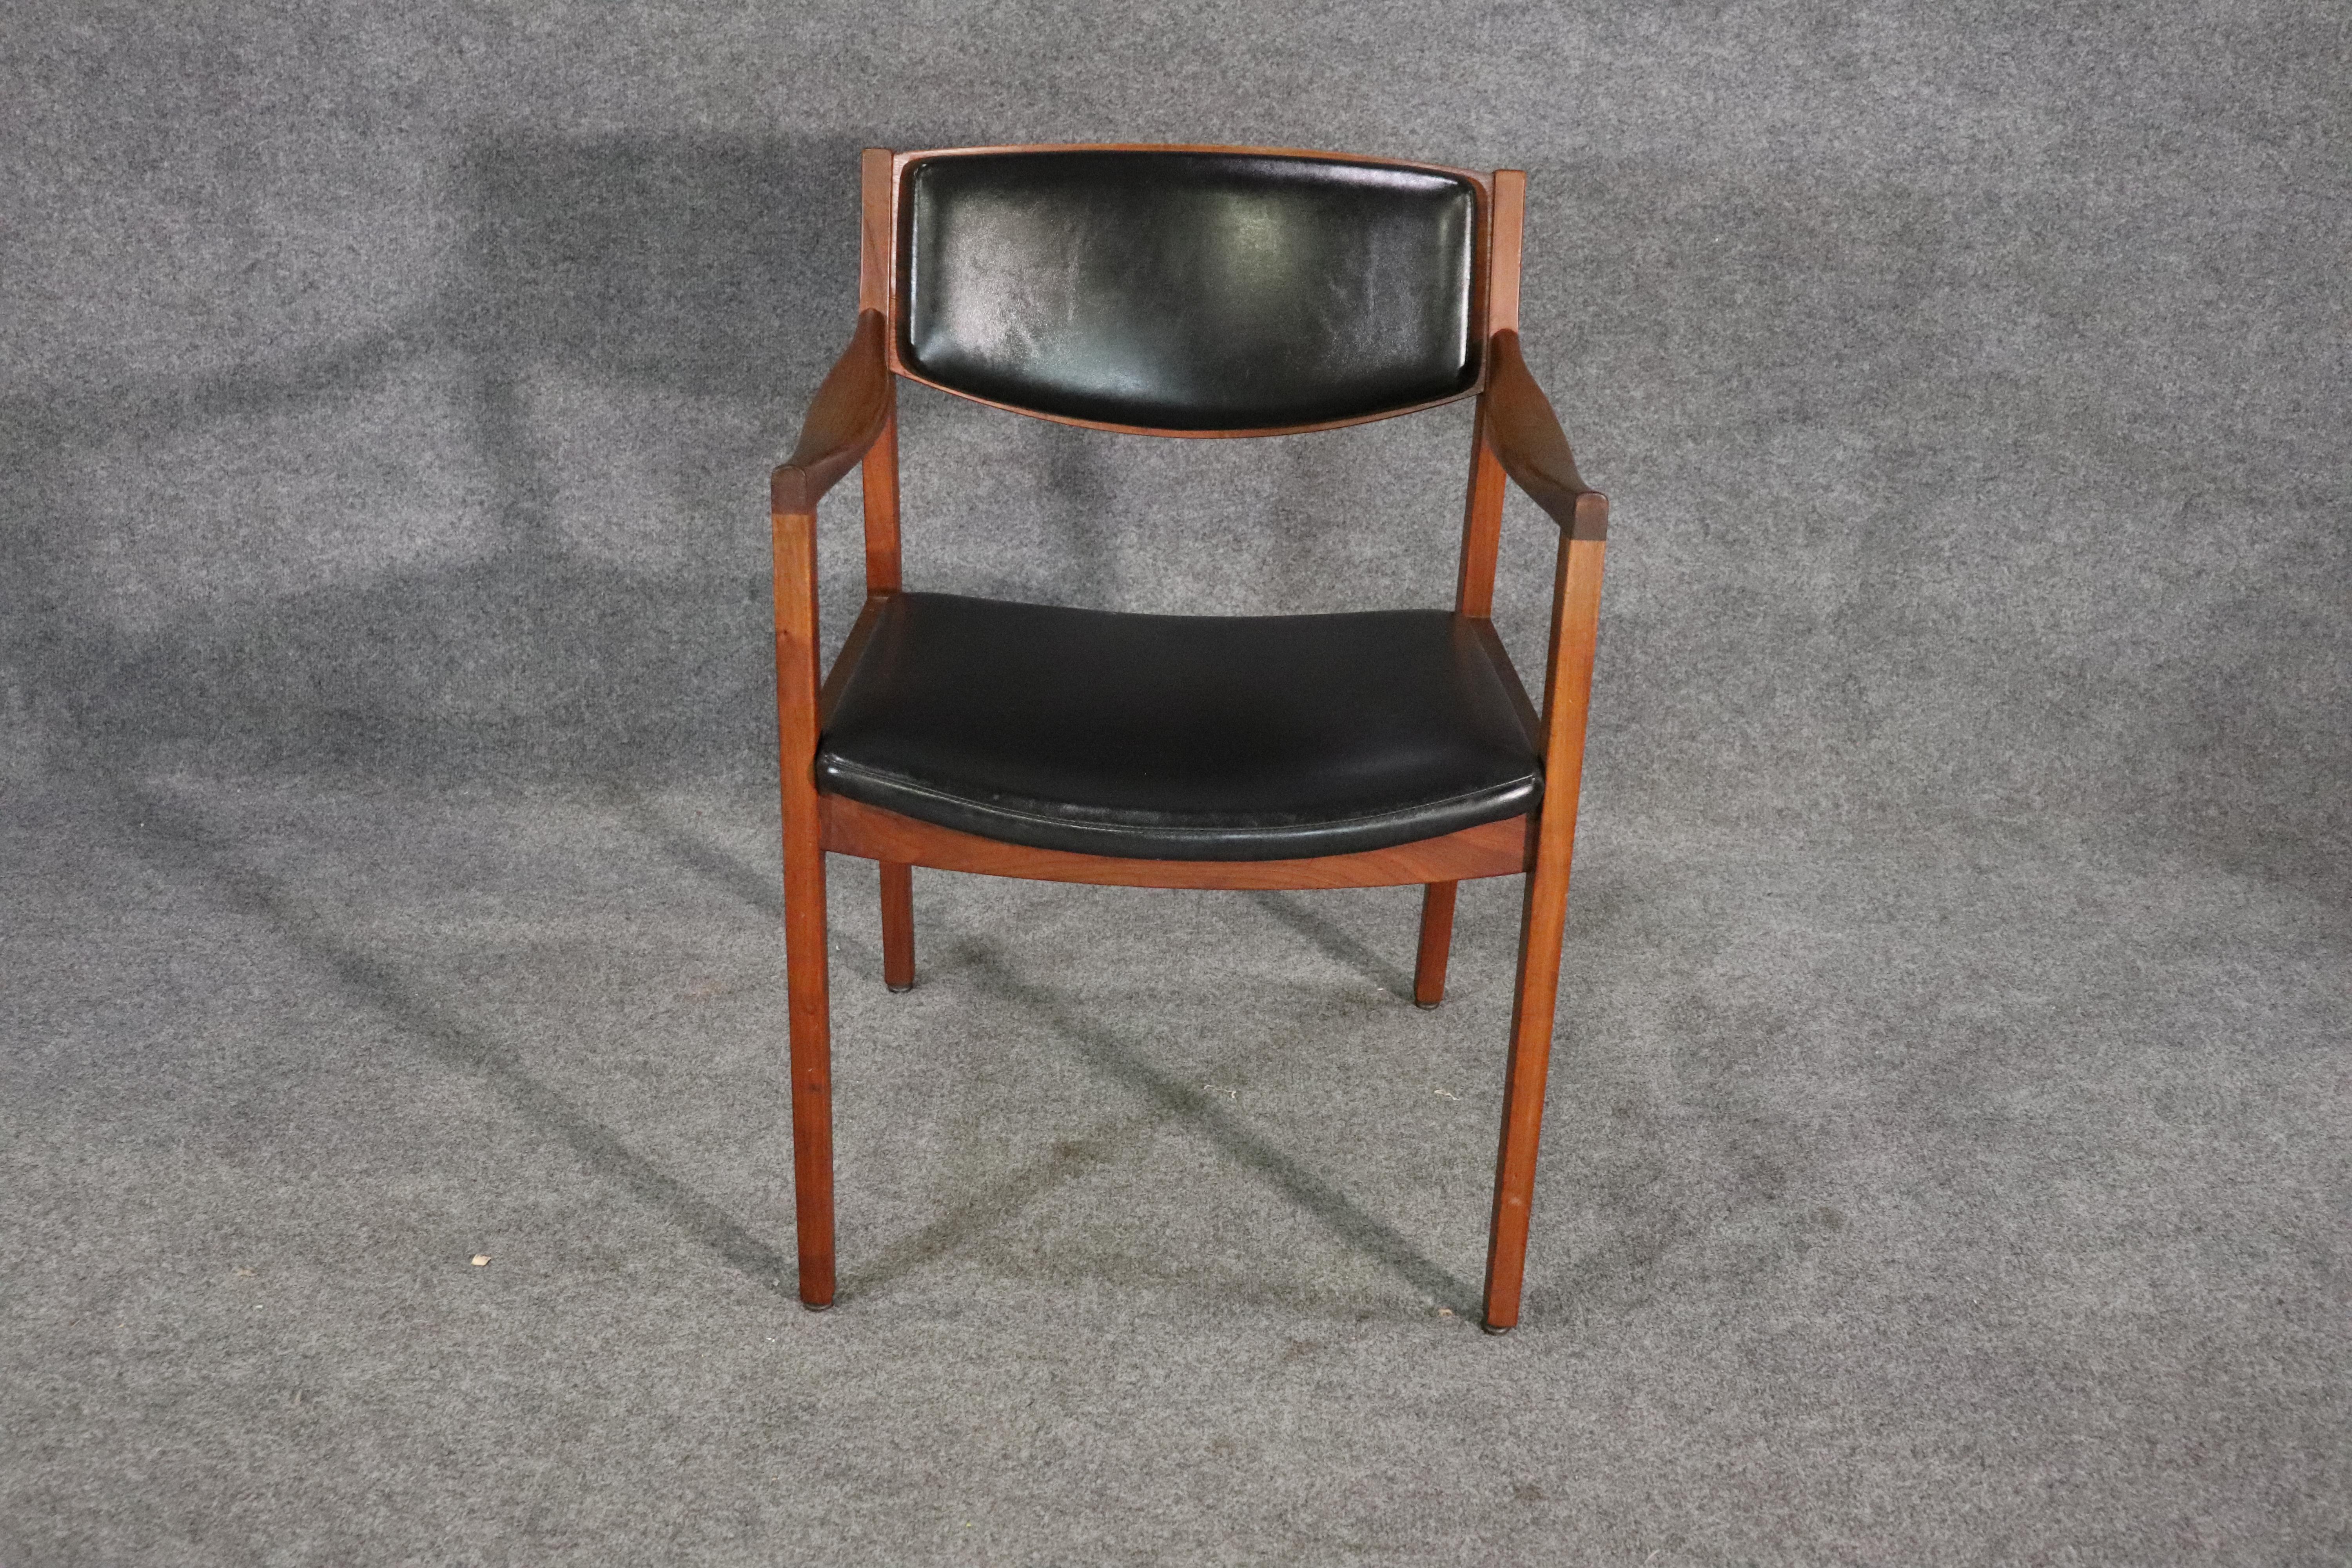 Single mid-century modern armchair by Gunlocke chair company. Sculpted arms with padded seat and back.
Please confirm location NY or NJ